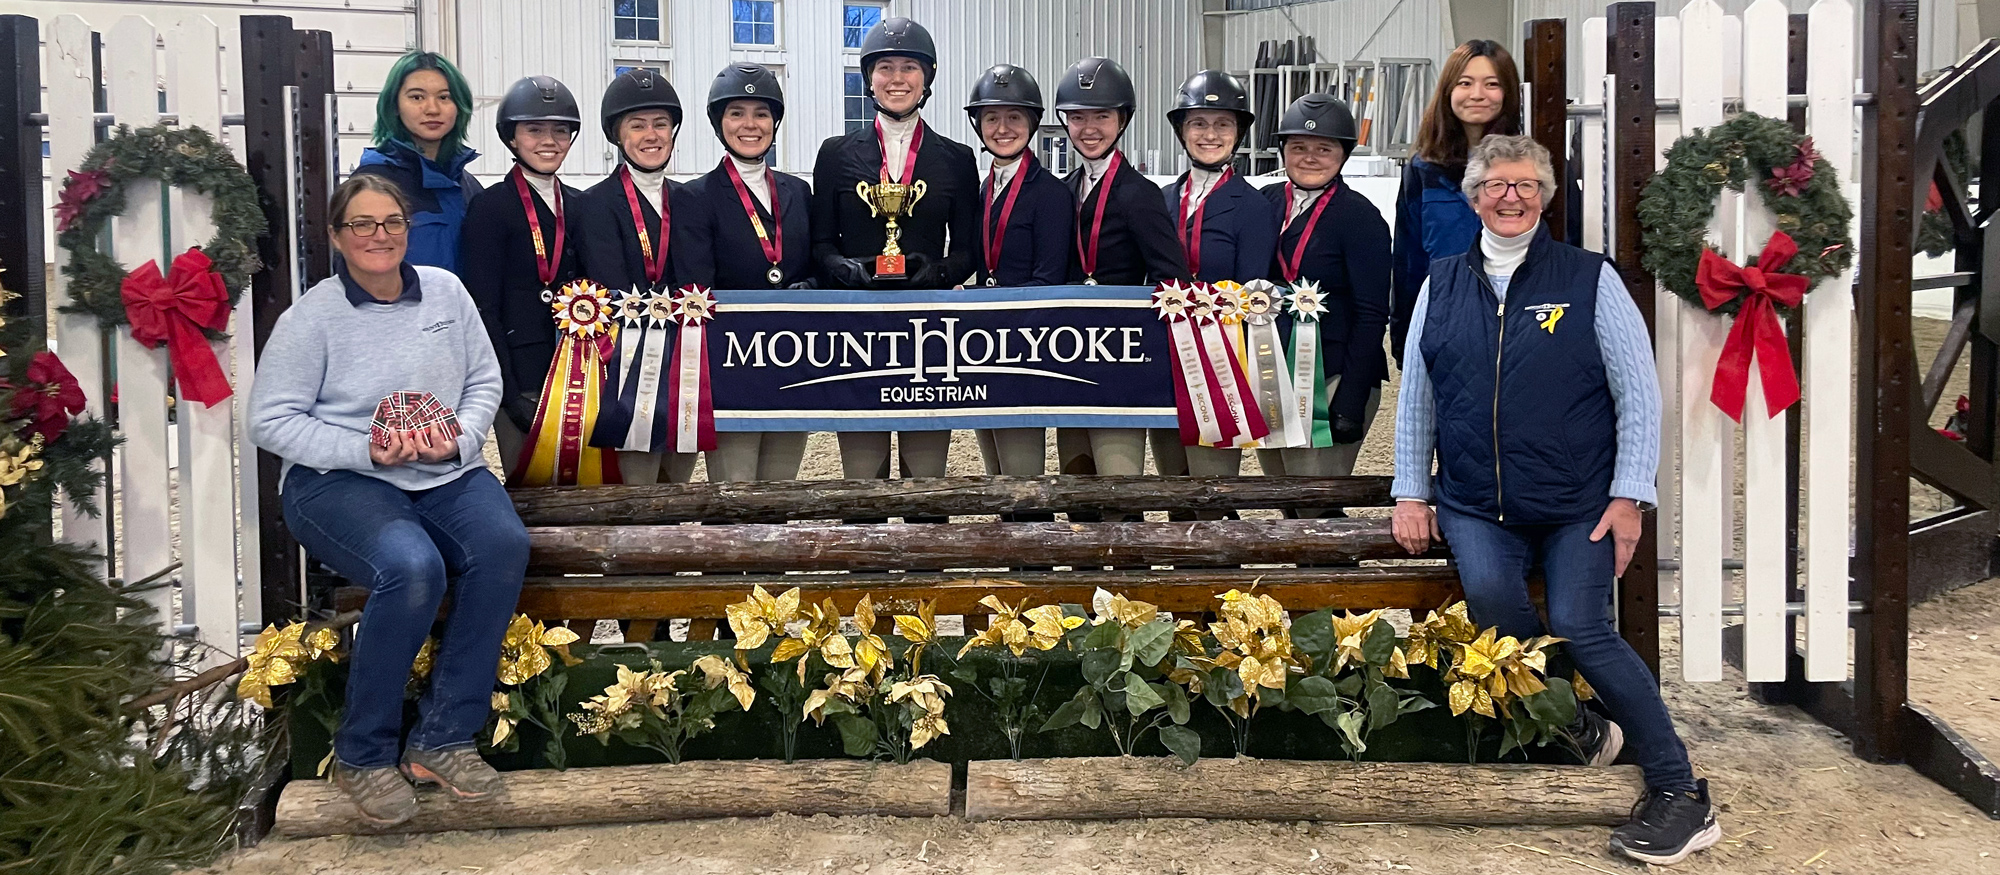 Equestrian team claims Reserve Champion honors at Holiday Tournament of Champions